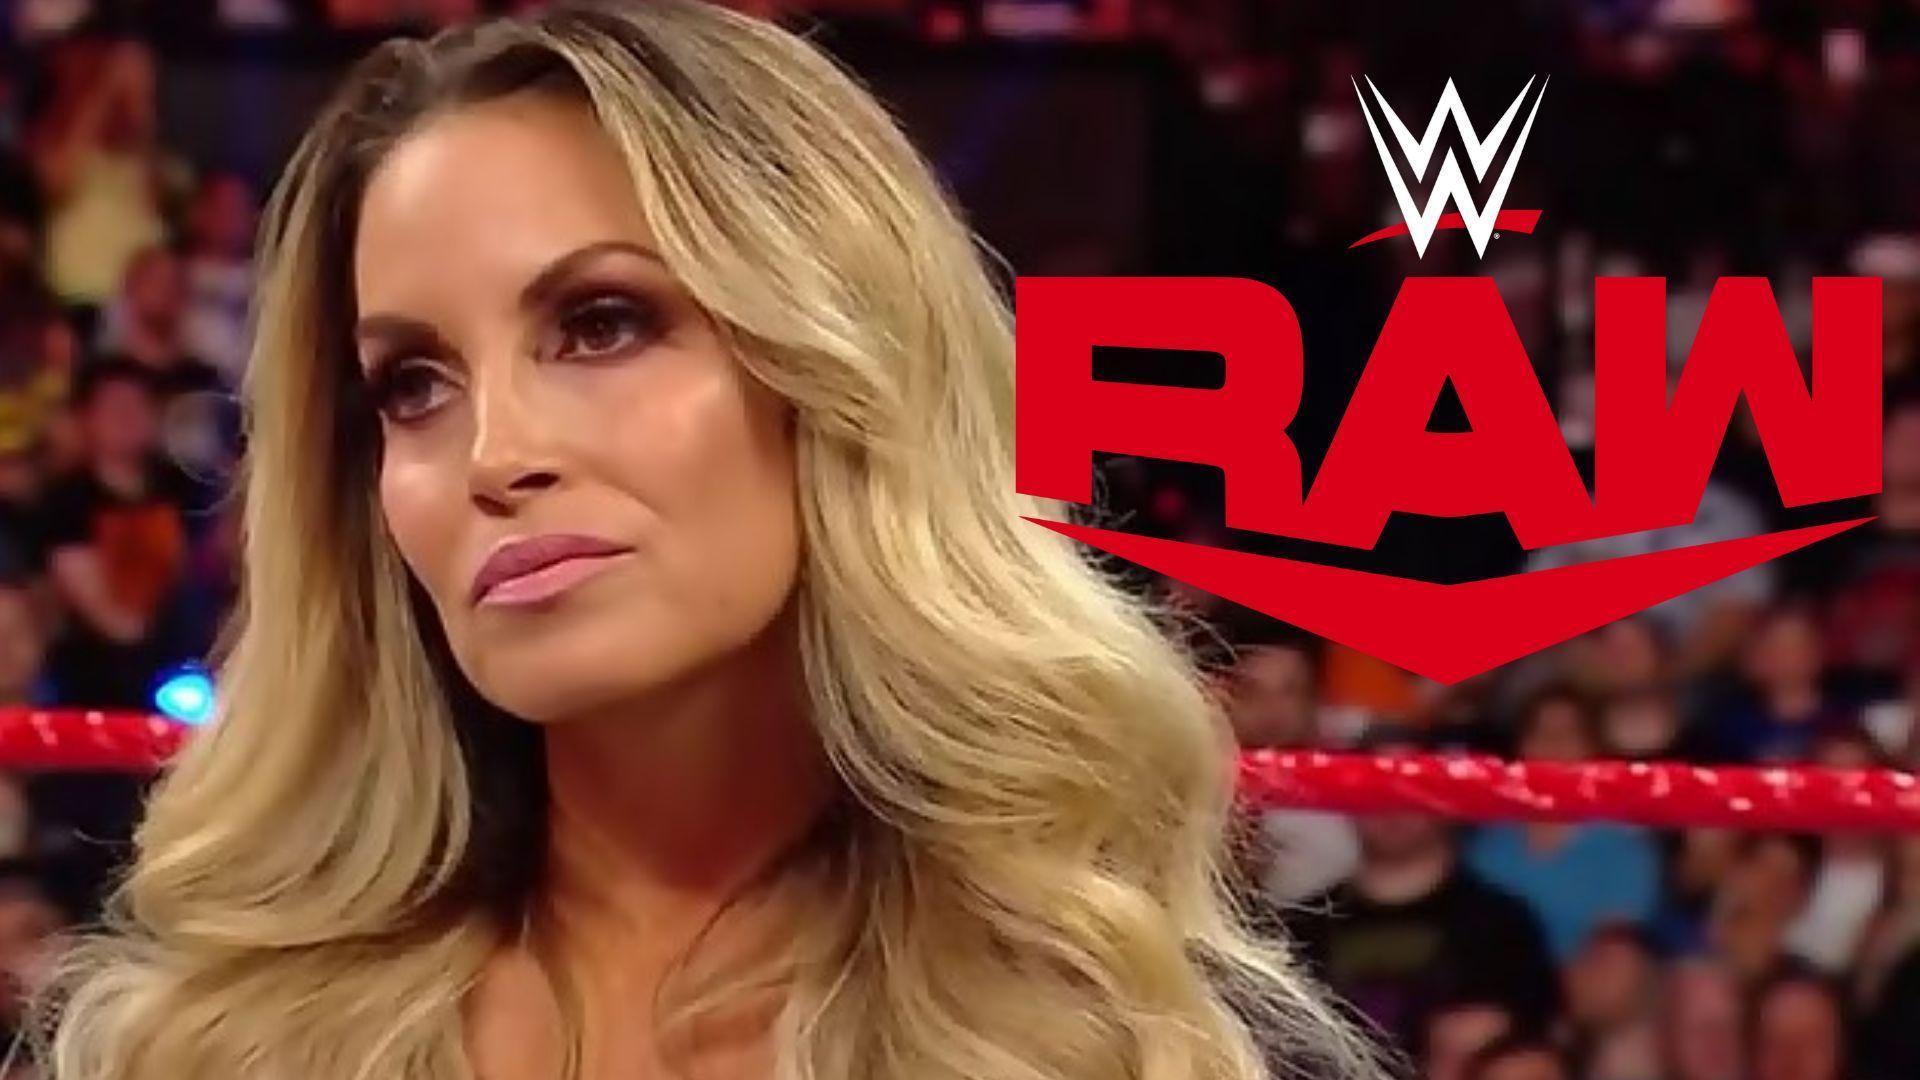 Trish Stratus turned heel on WWE RAW last week for the first time in nearly two decades!